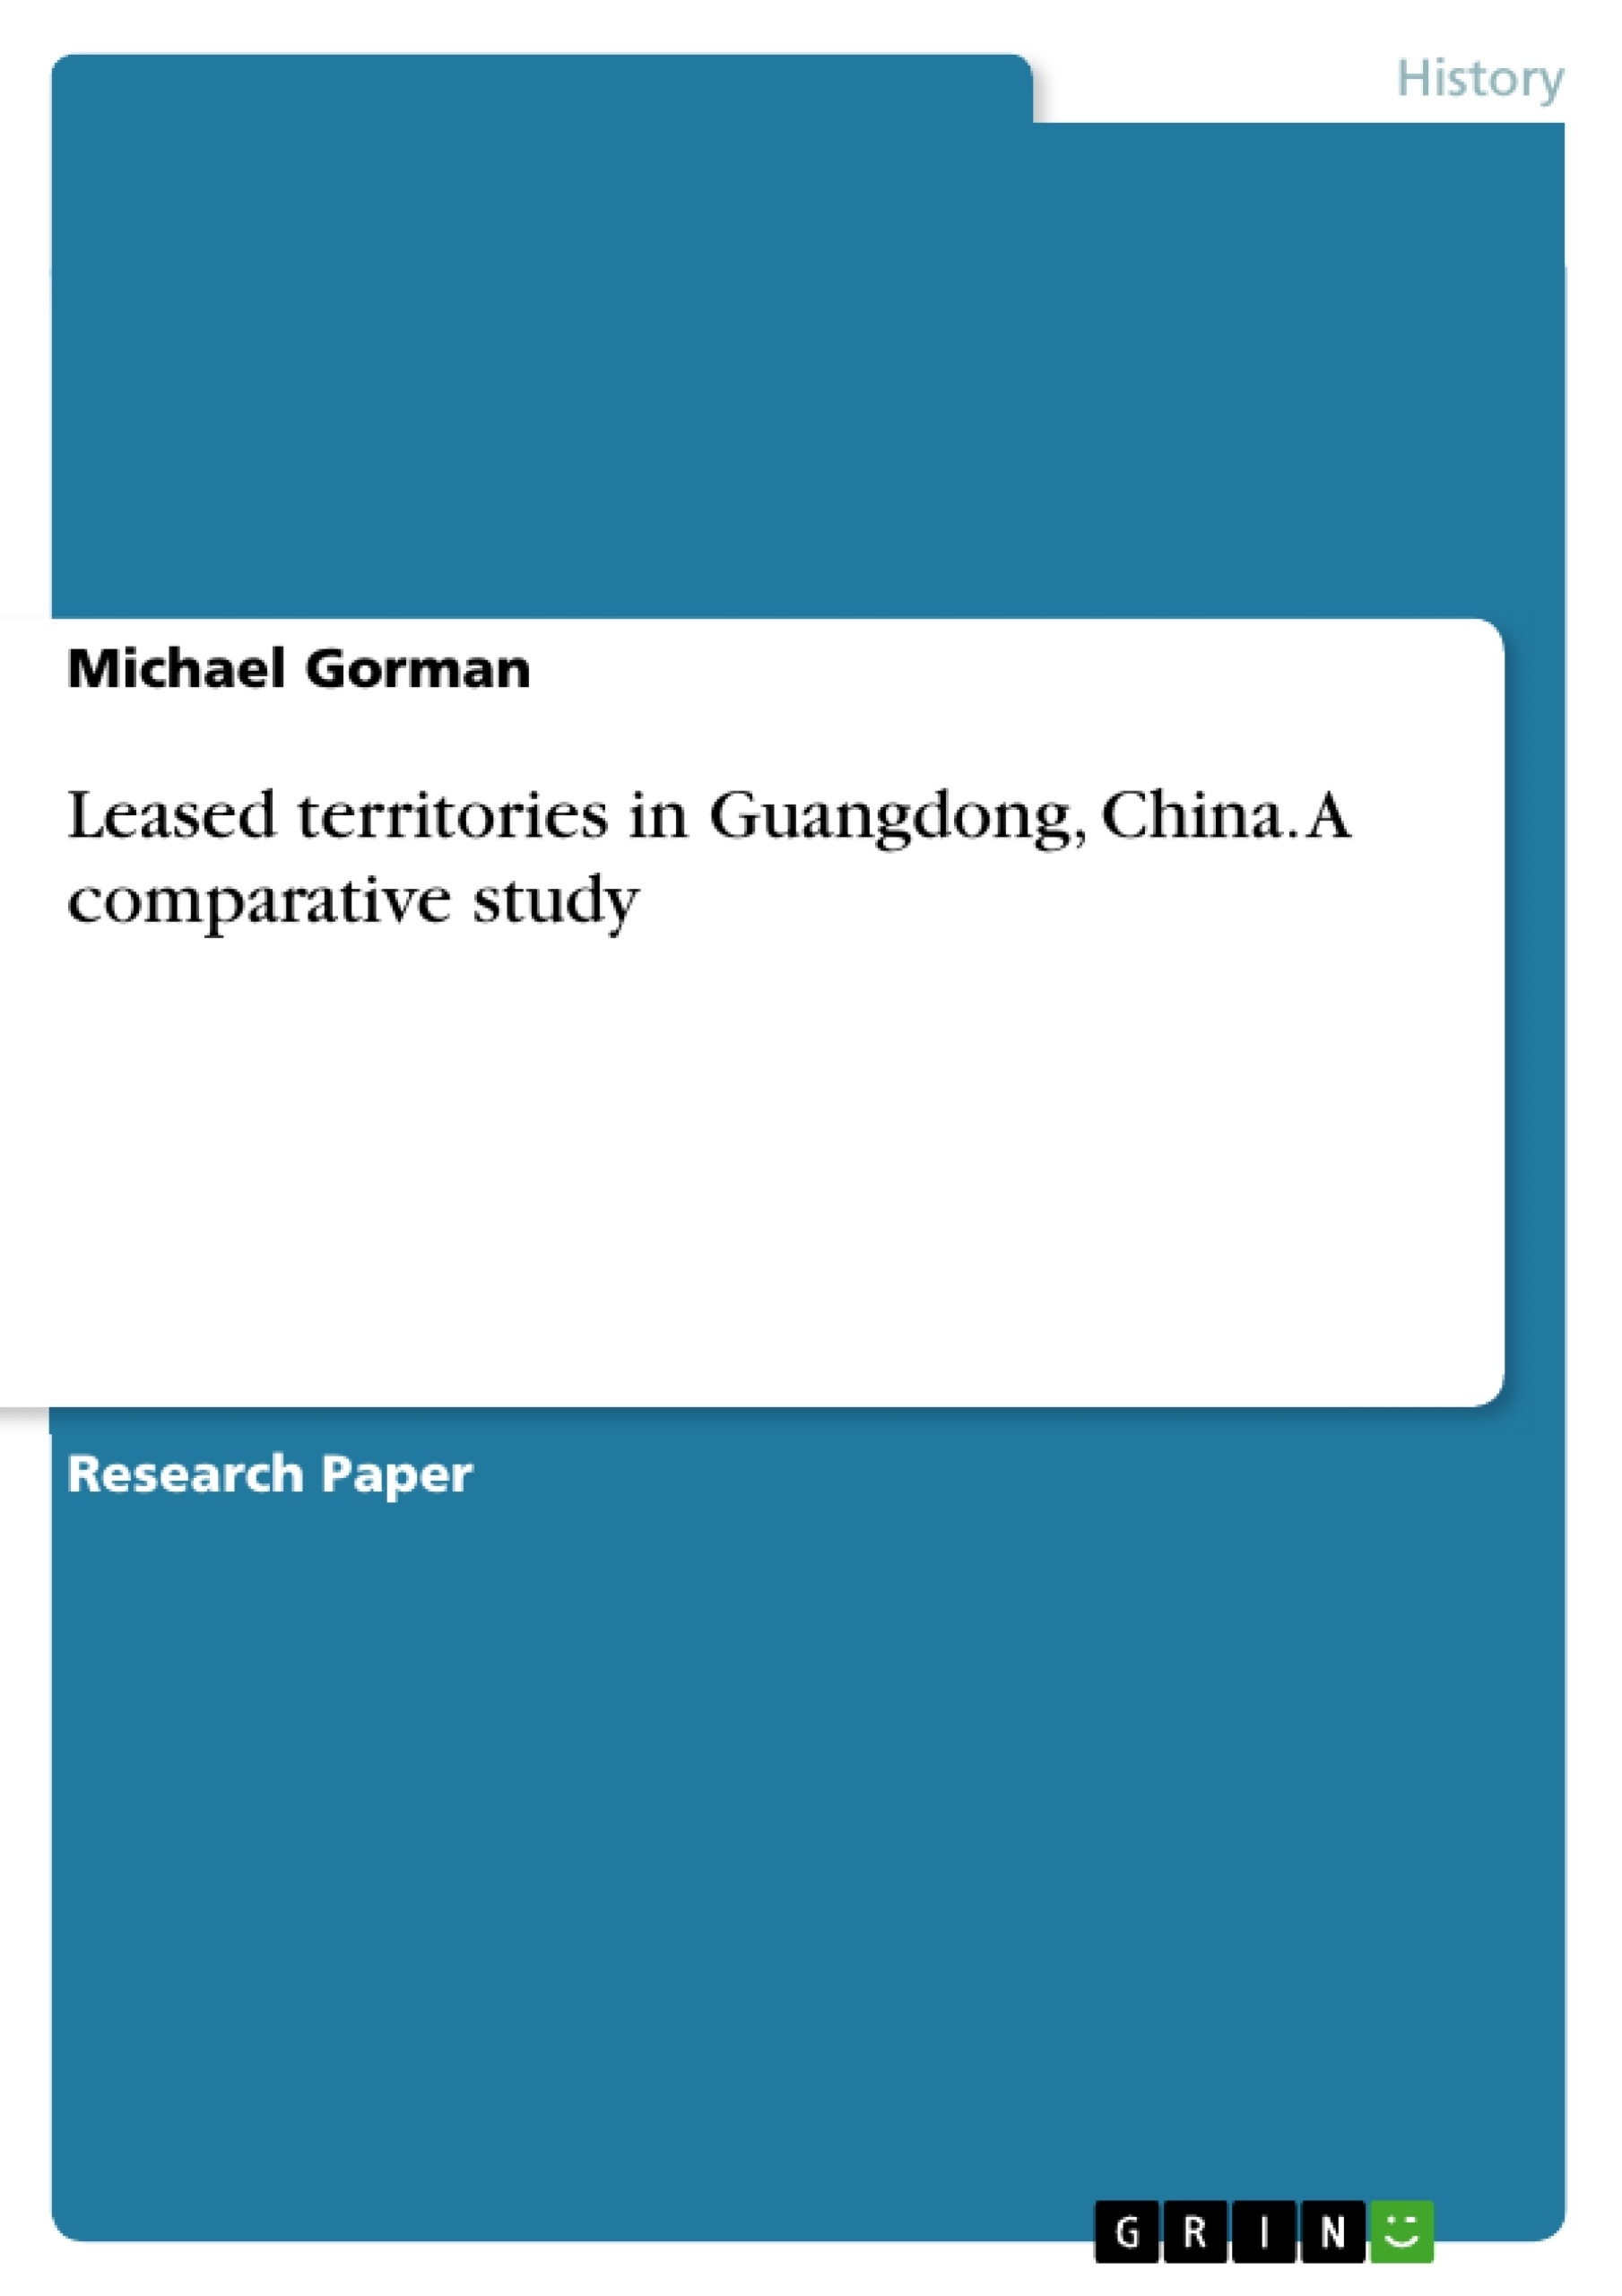 Titre: Leased territories in Guangdong, China. A comparative study